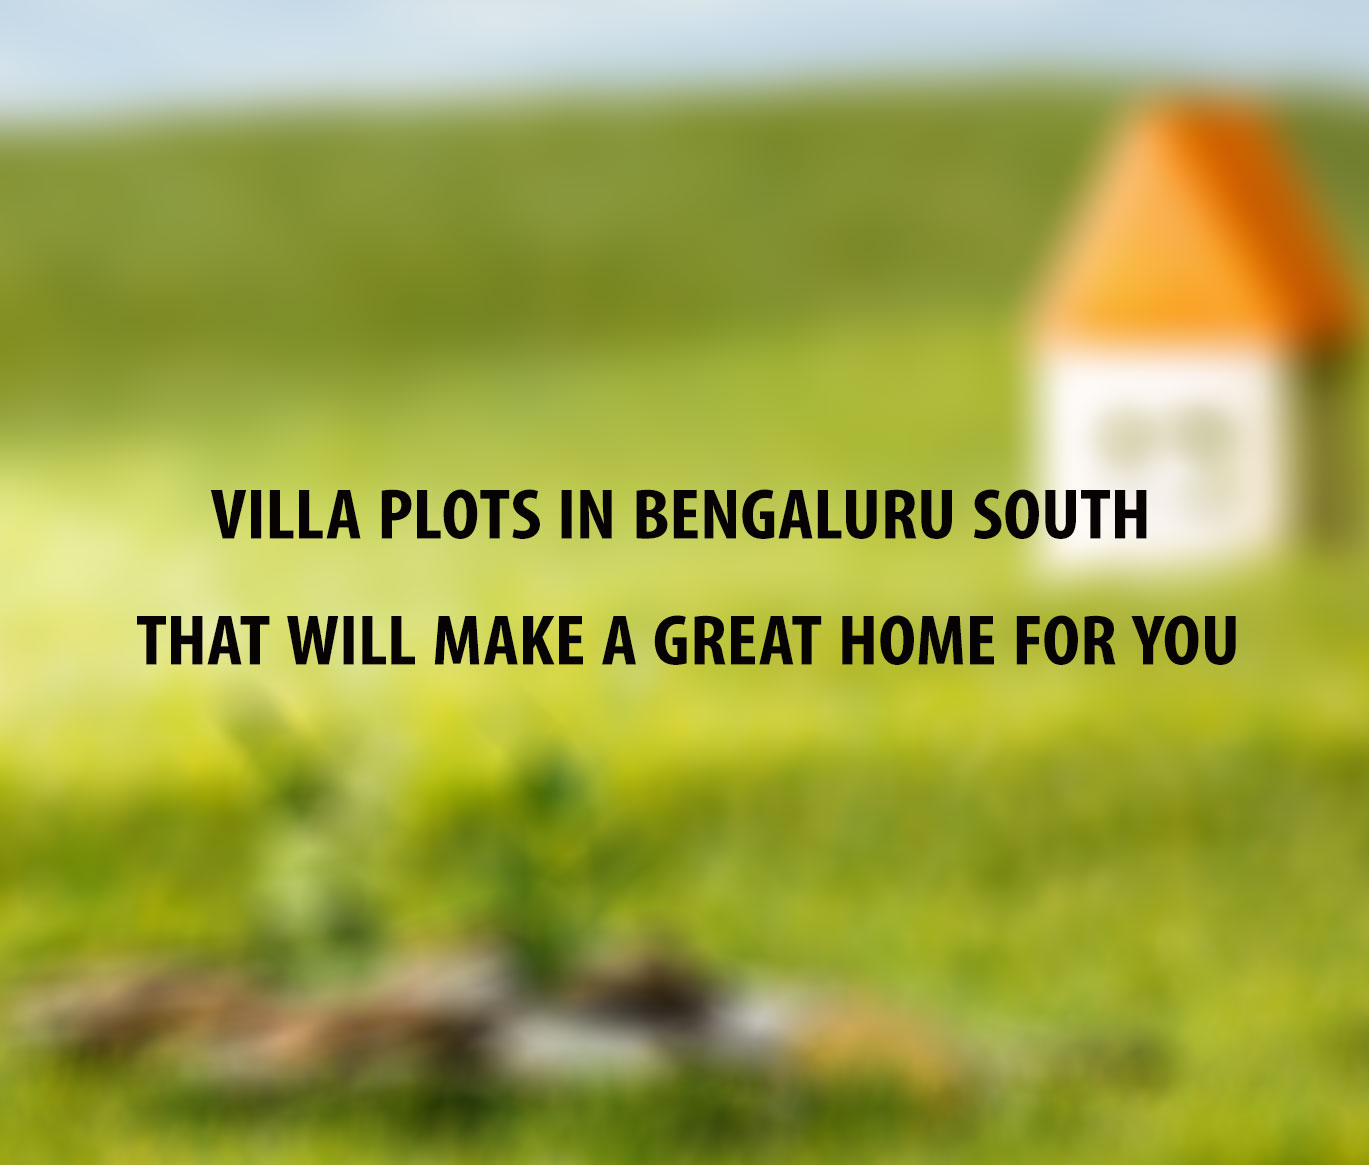 Villa Plots in Bengaluru South That Will Make a Great Home for You